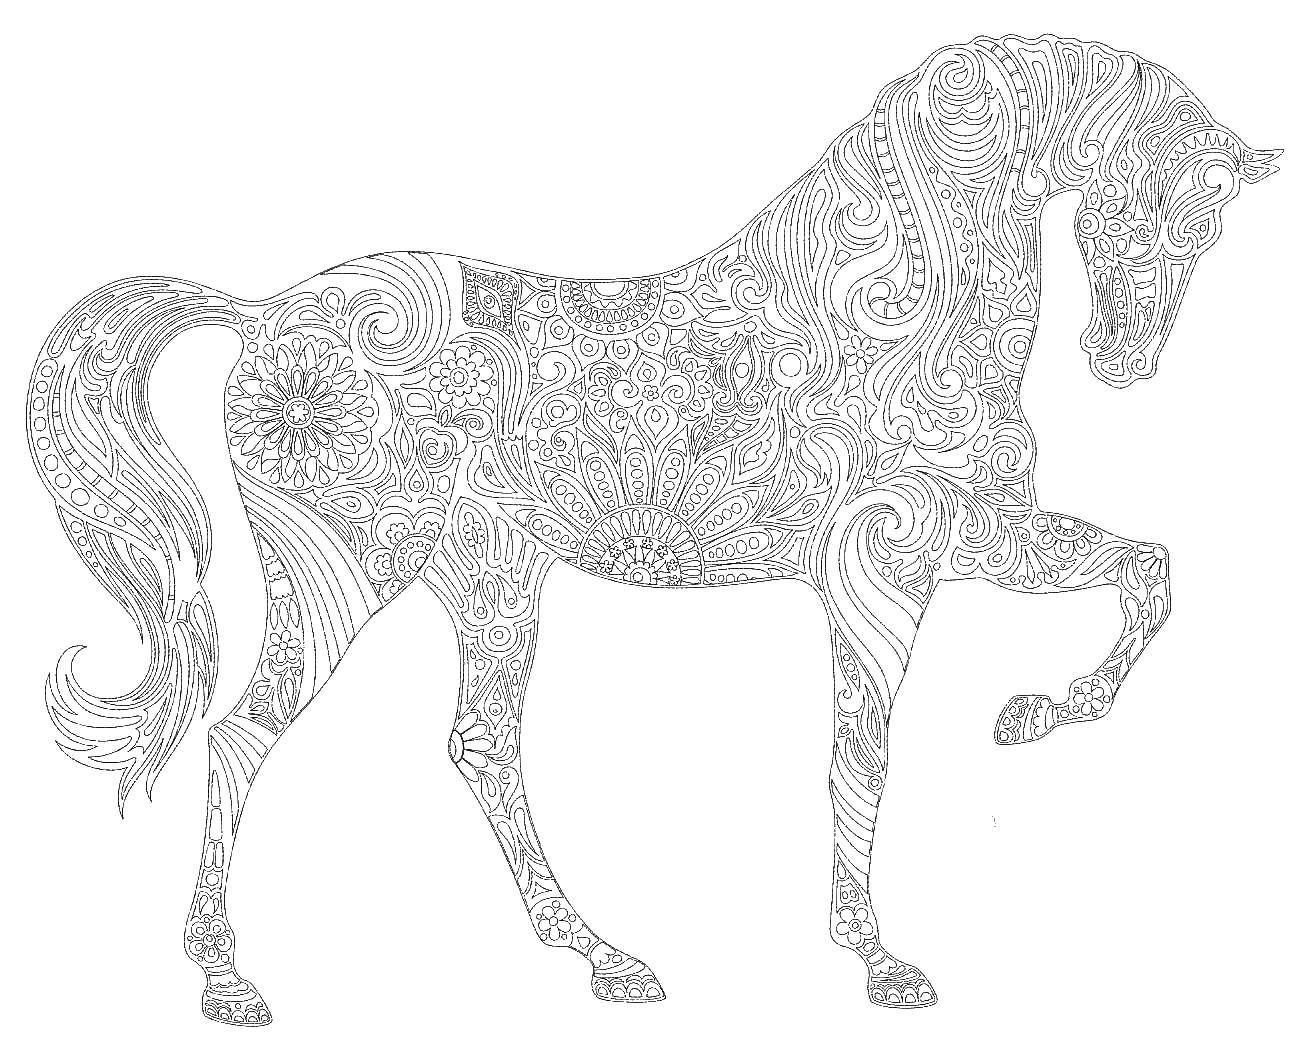 Coloring Coloring horse-stress. Category coloring antistress. Tags:  coloring, anti-stress, horse.